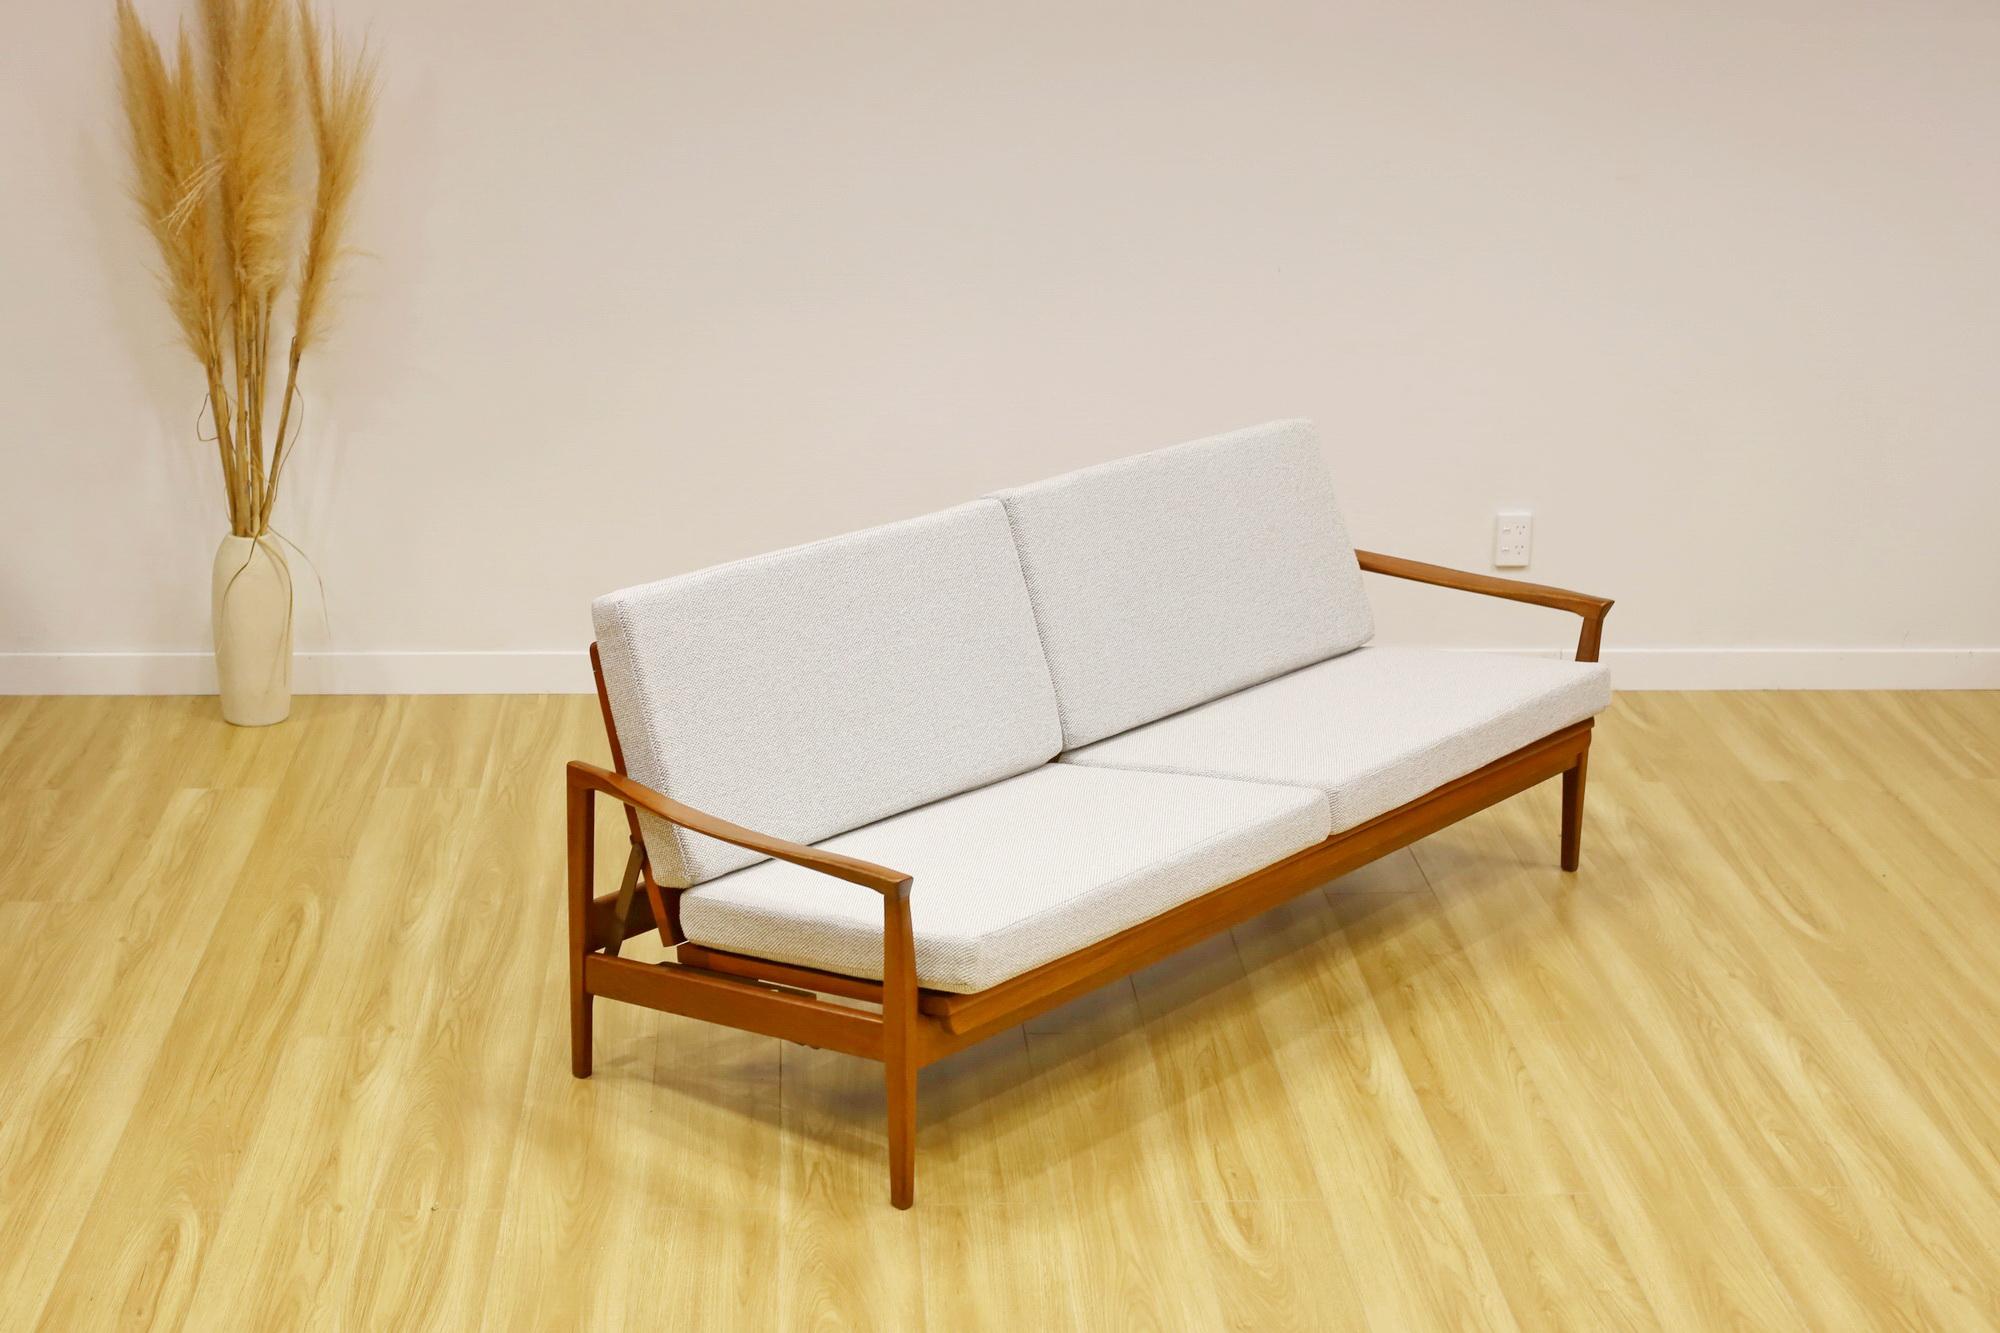 FLER 'FLERMONT' Daybed in good condtion.

New upholstery with high density foam and new zippable fabric cover.

Strong frames, no wobbly, beautiful wood grains.

Folding mechanism works smoothly.

Small scratches/dents/imperfection. 

W 204cm, D